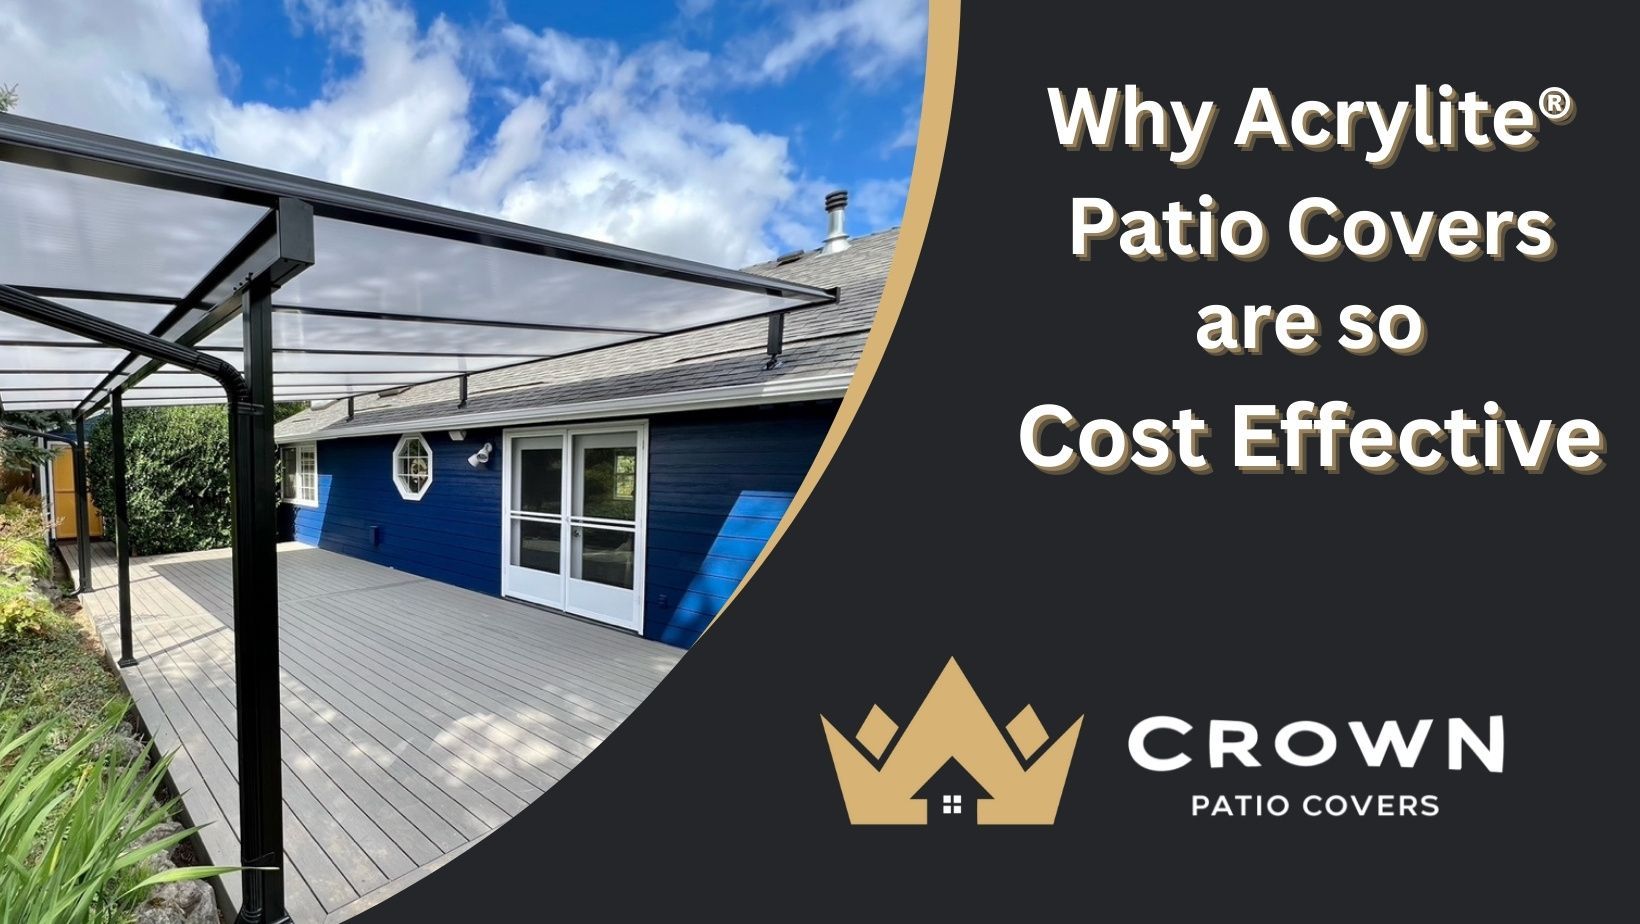 Portland Oregon Patio Cover Company Crown Patio Covers Certified ACRYLITE Patio Cover Contractor. 